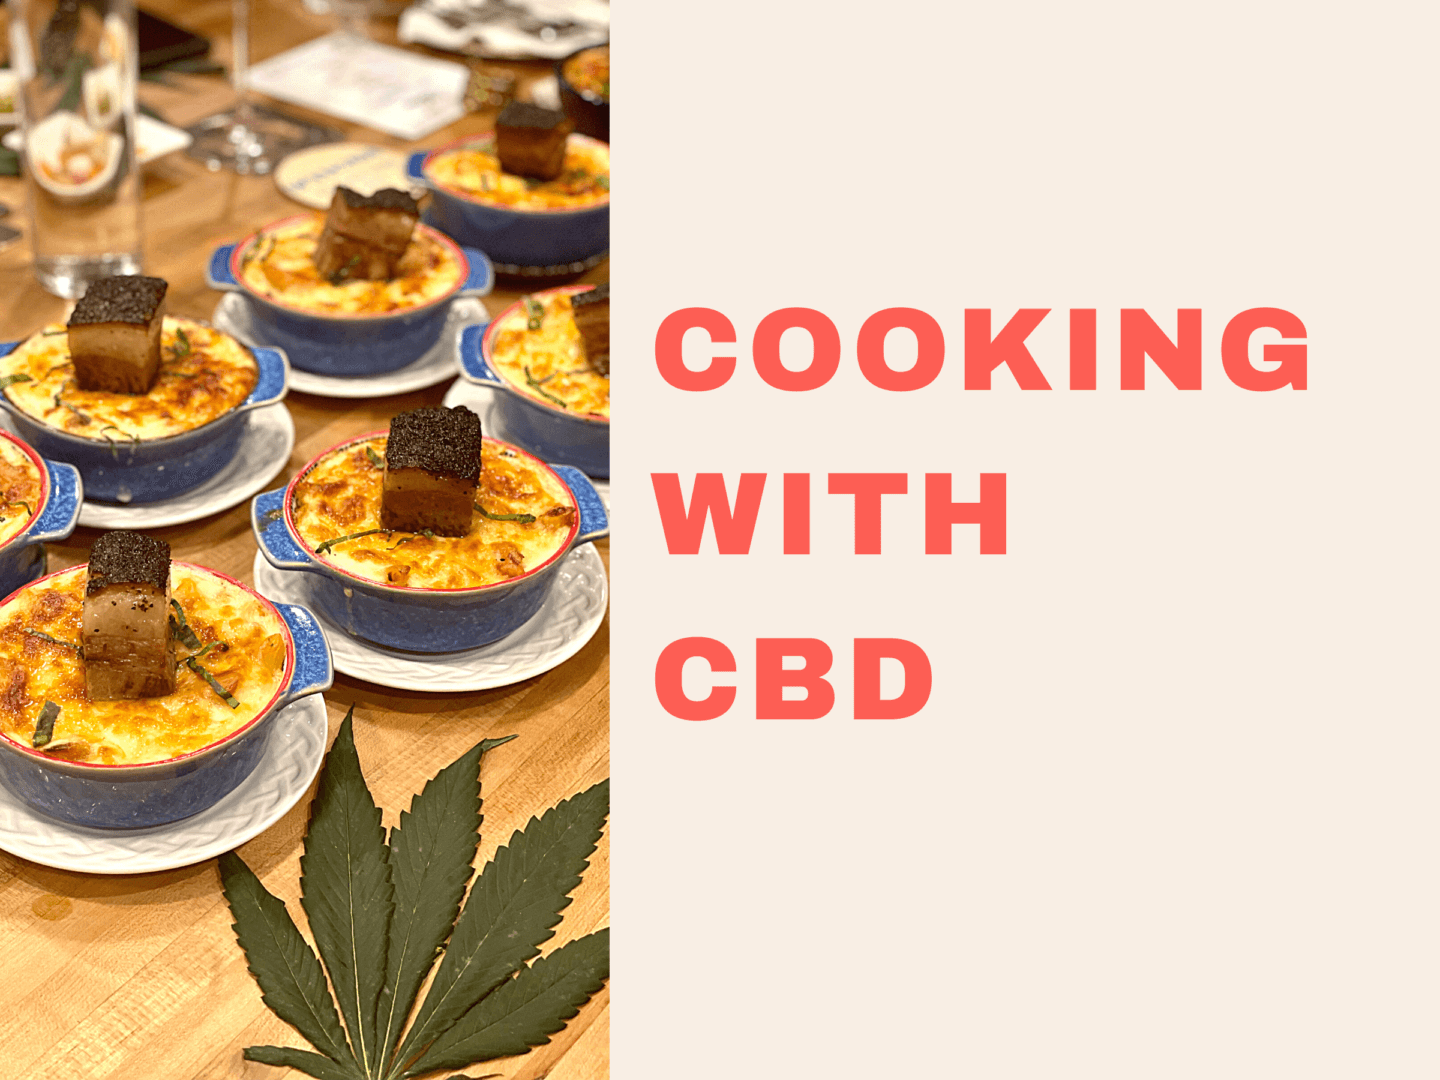 COOKING WITH CBD